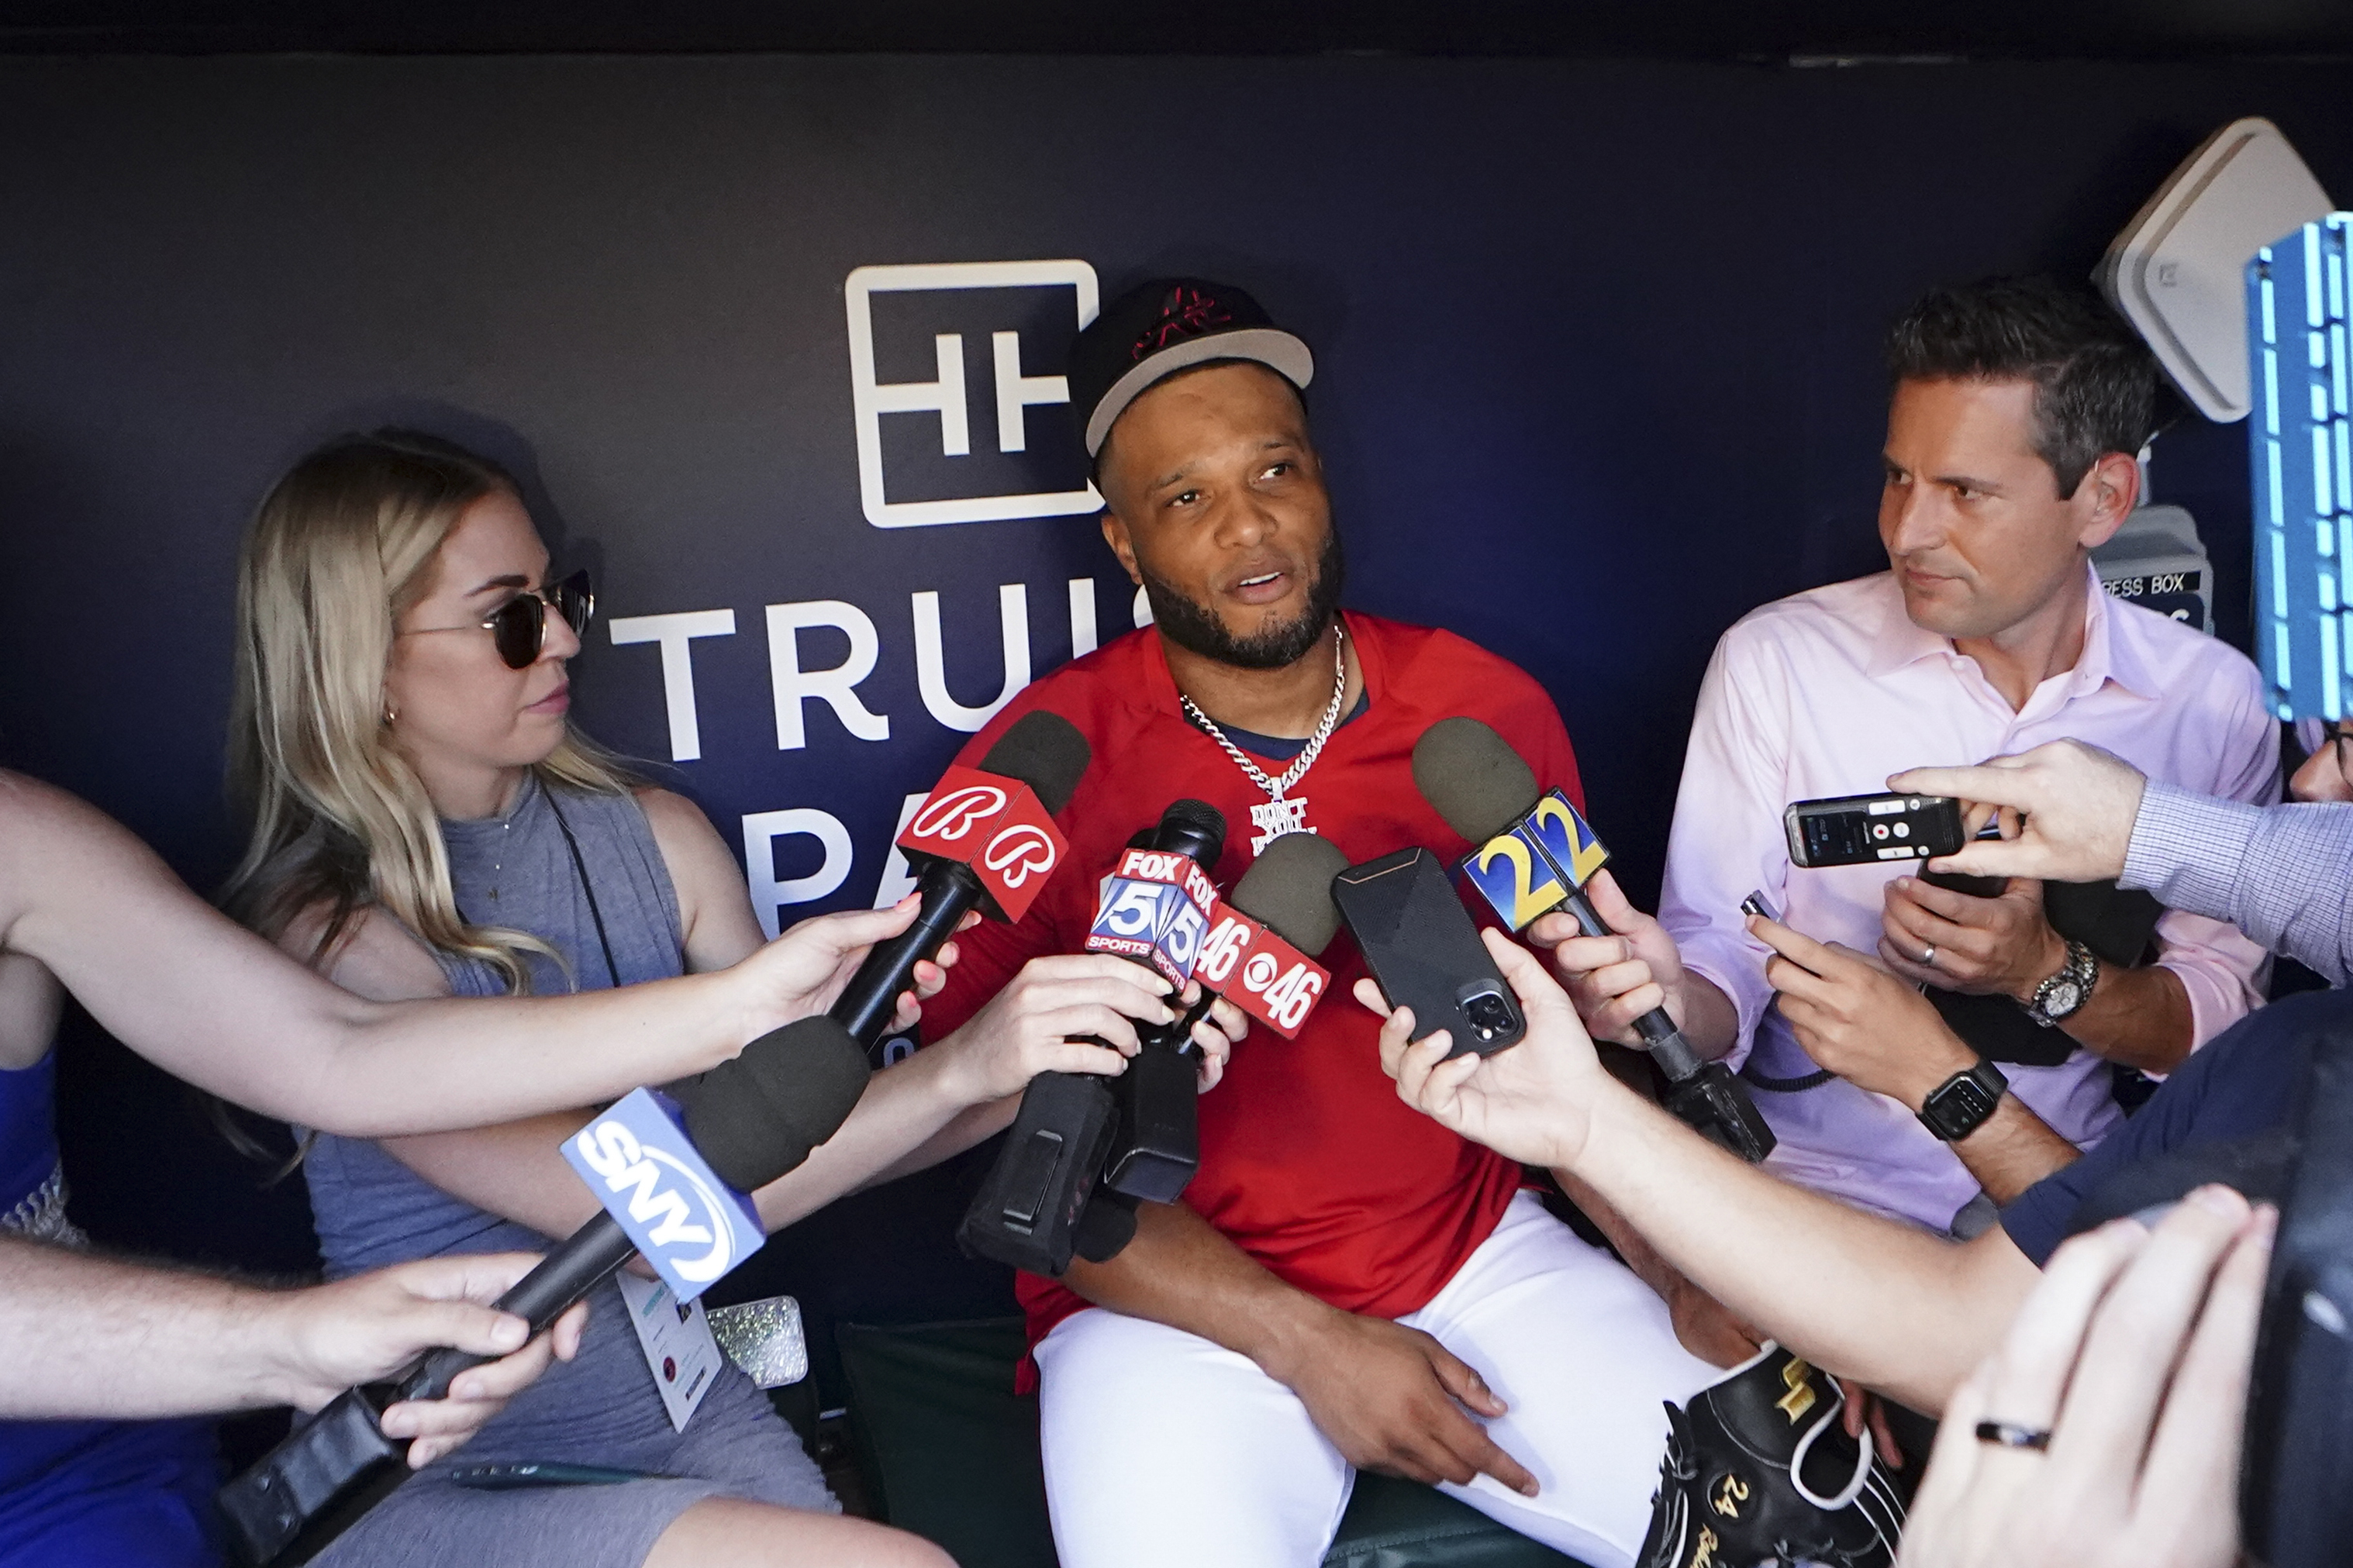 Mets Designate Robinson Cano for Assignment With Two Years Left on